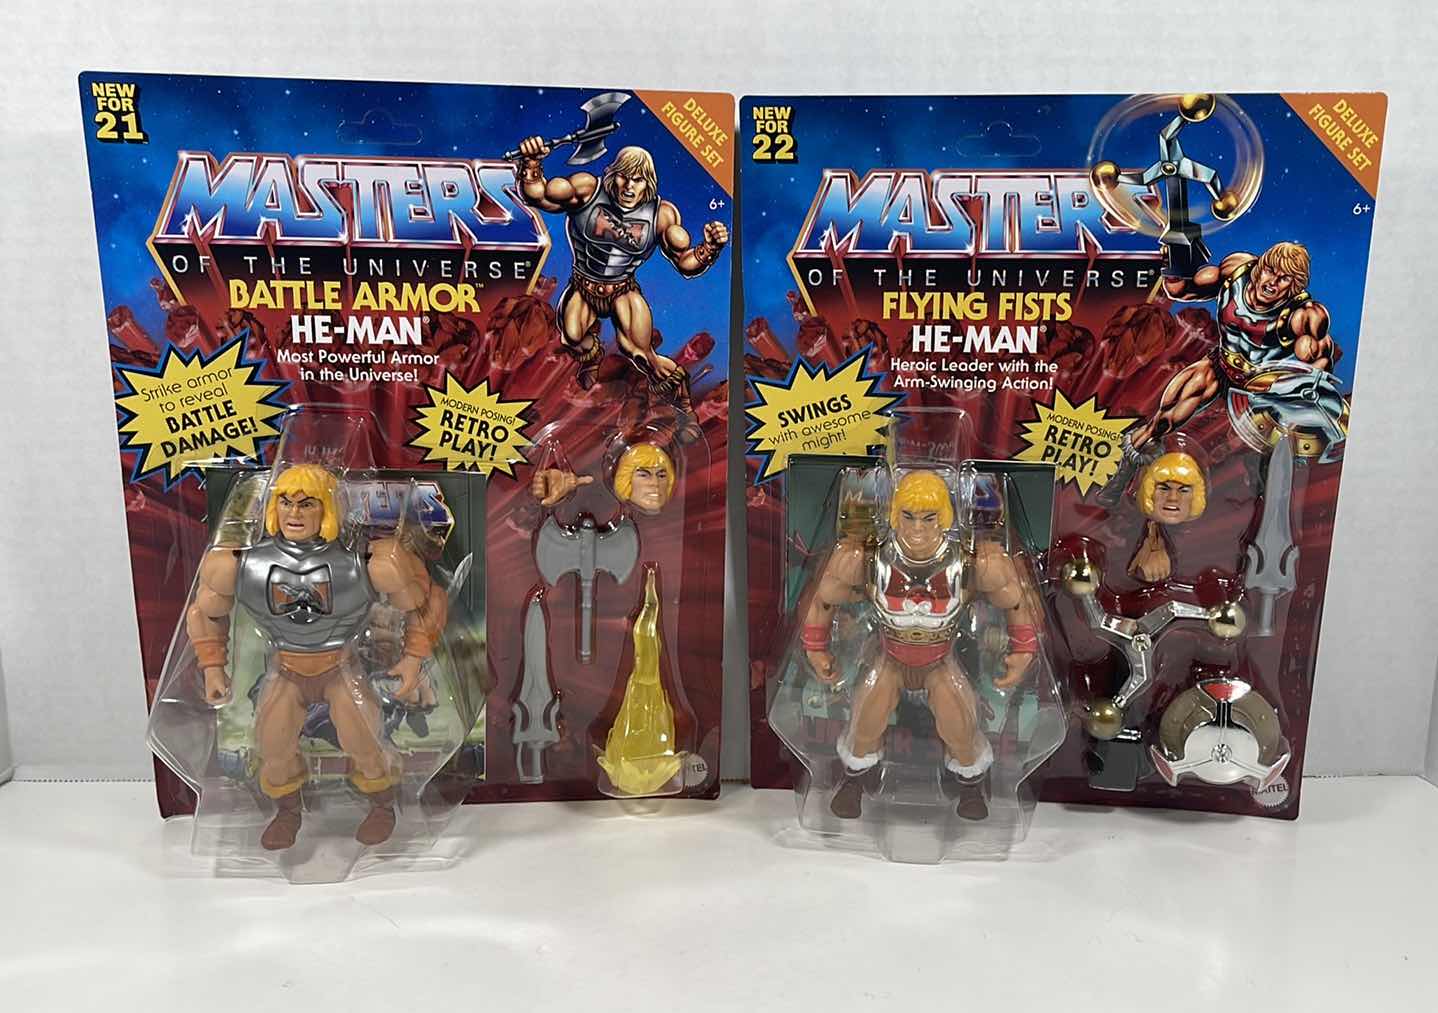 Photo 1 of NIB MASTERS OF THE UNIVERSE BATTLE ARMOR HE-MAN & FLYING FISTS HE-MAN RETRO PLAY ACTION FIGURES & ACCESSORIES 